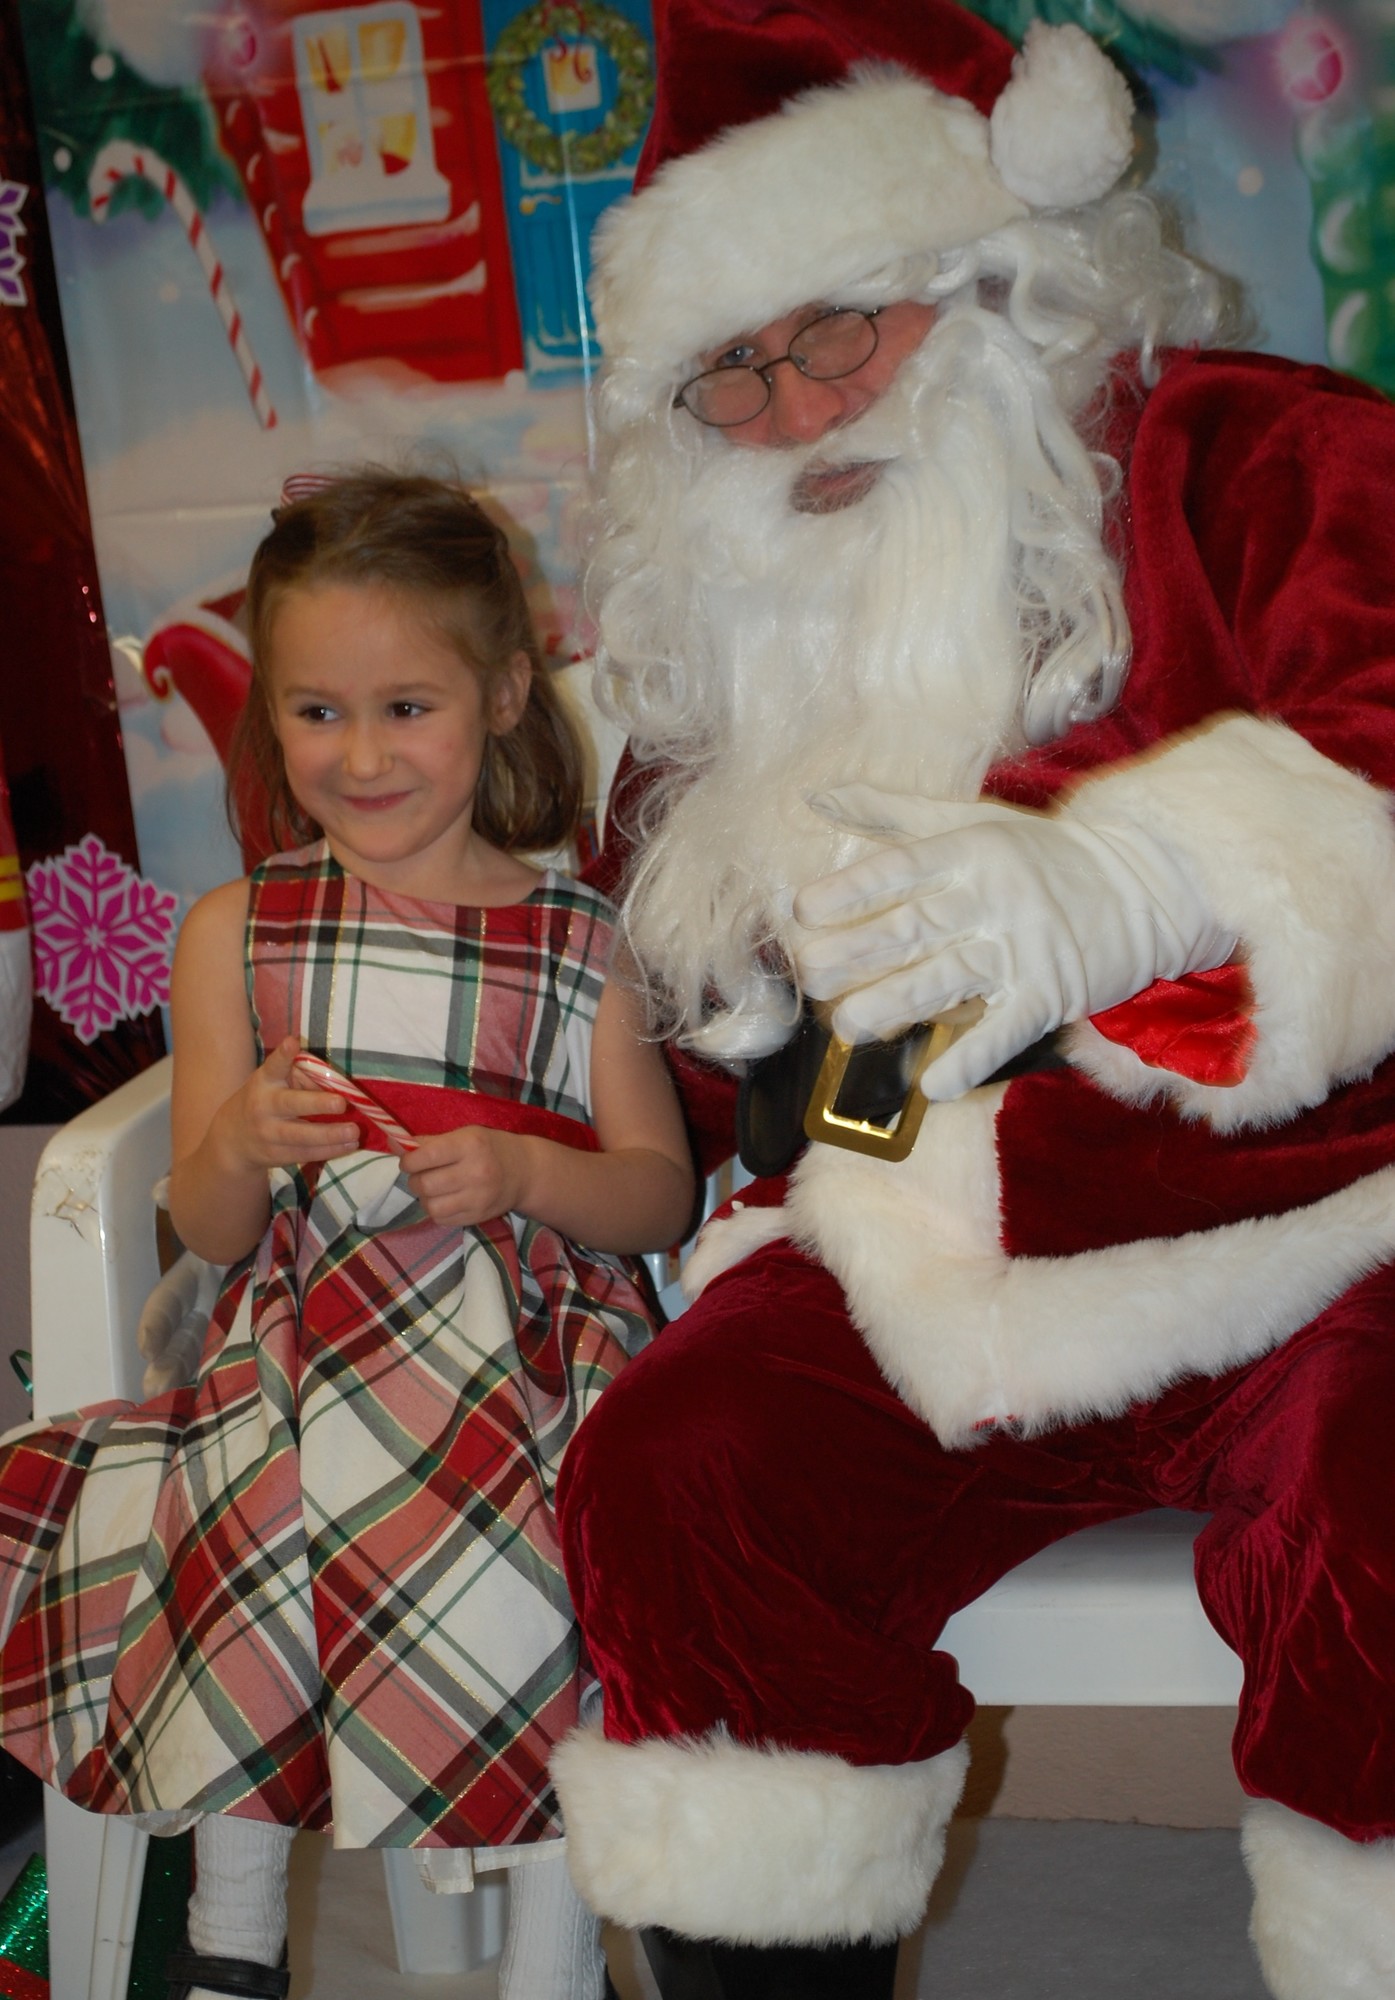 Jenna Caniano told Santa what she wants for Christmas.